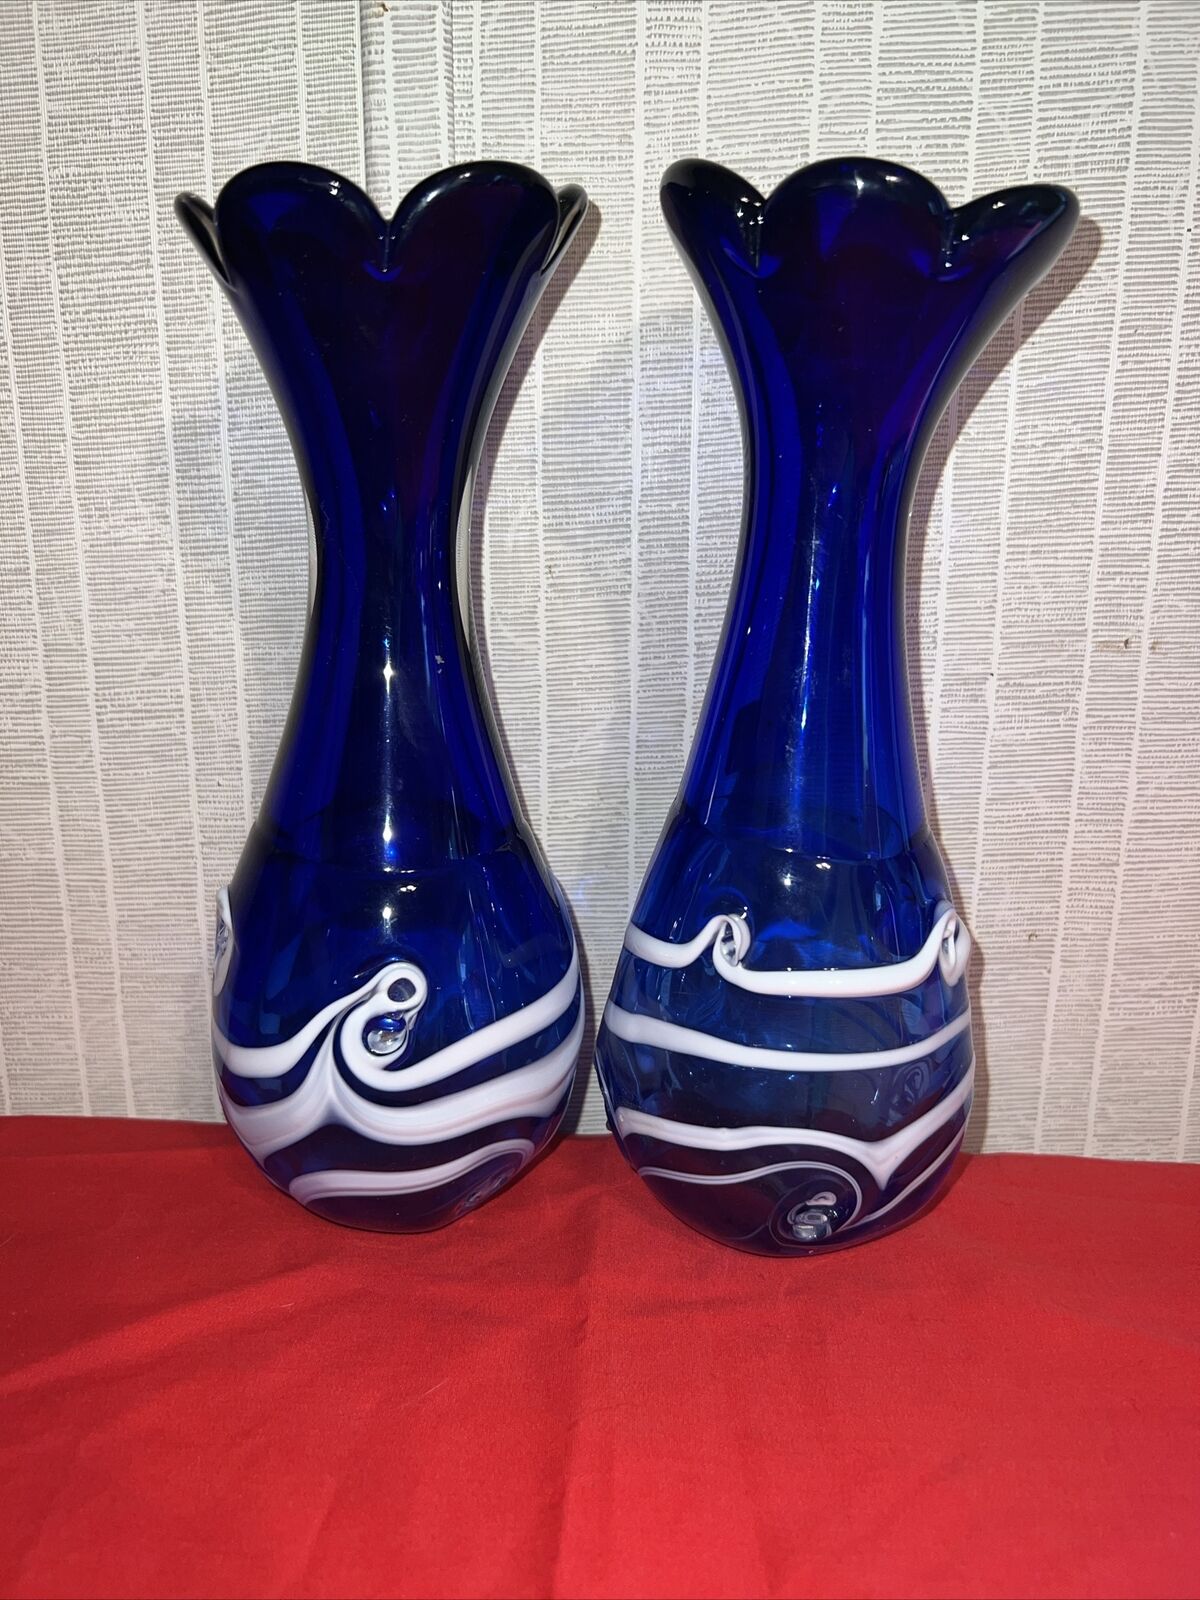 Two Hand Painted Blue Vases Antique